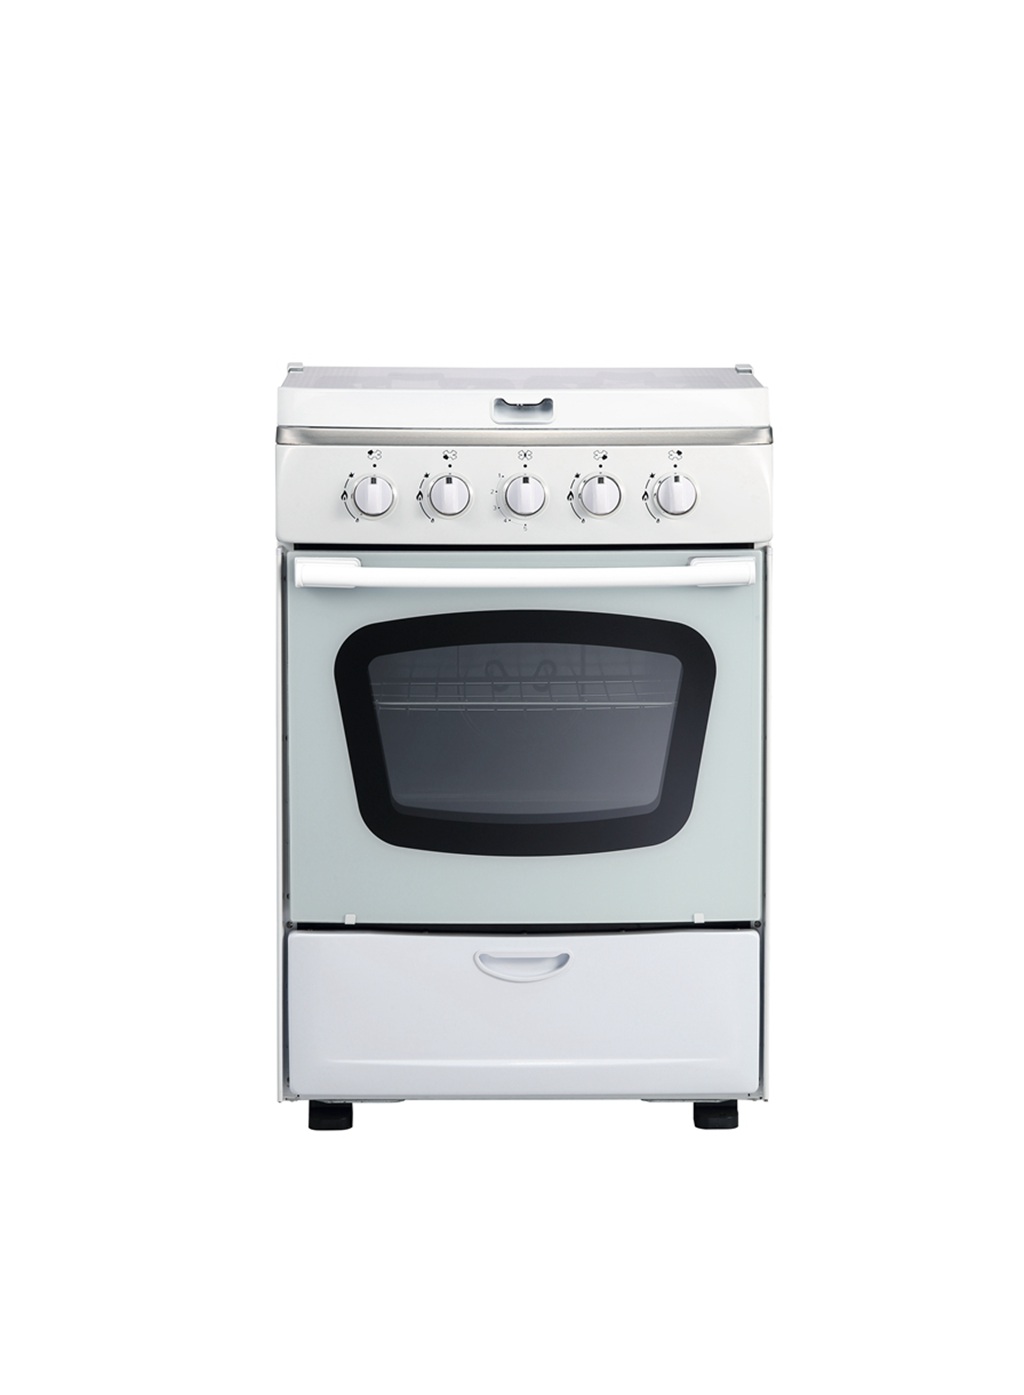 24 Inches Wide Freestanding Gas Oven with 4 Burners